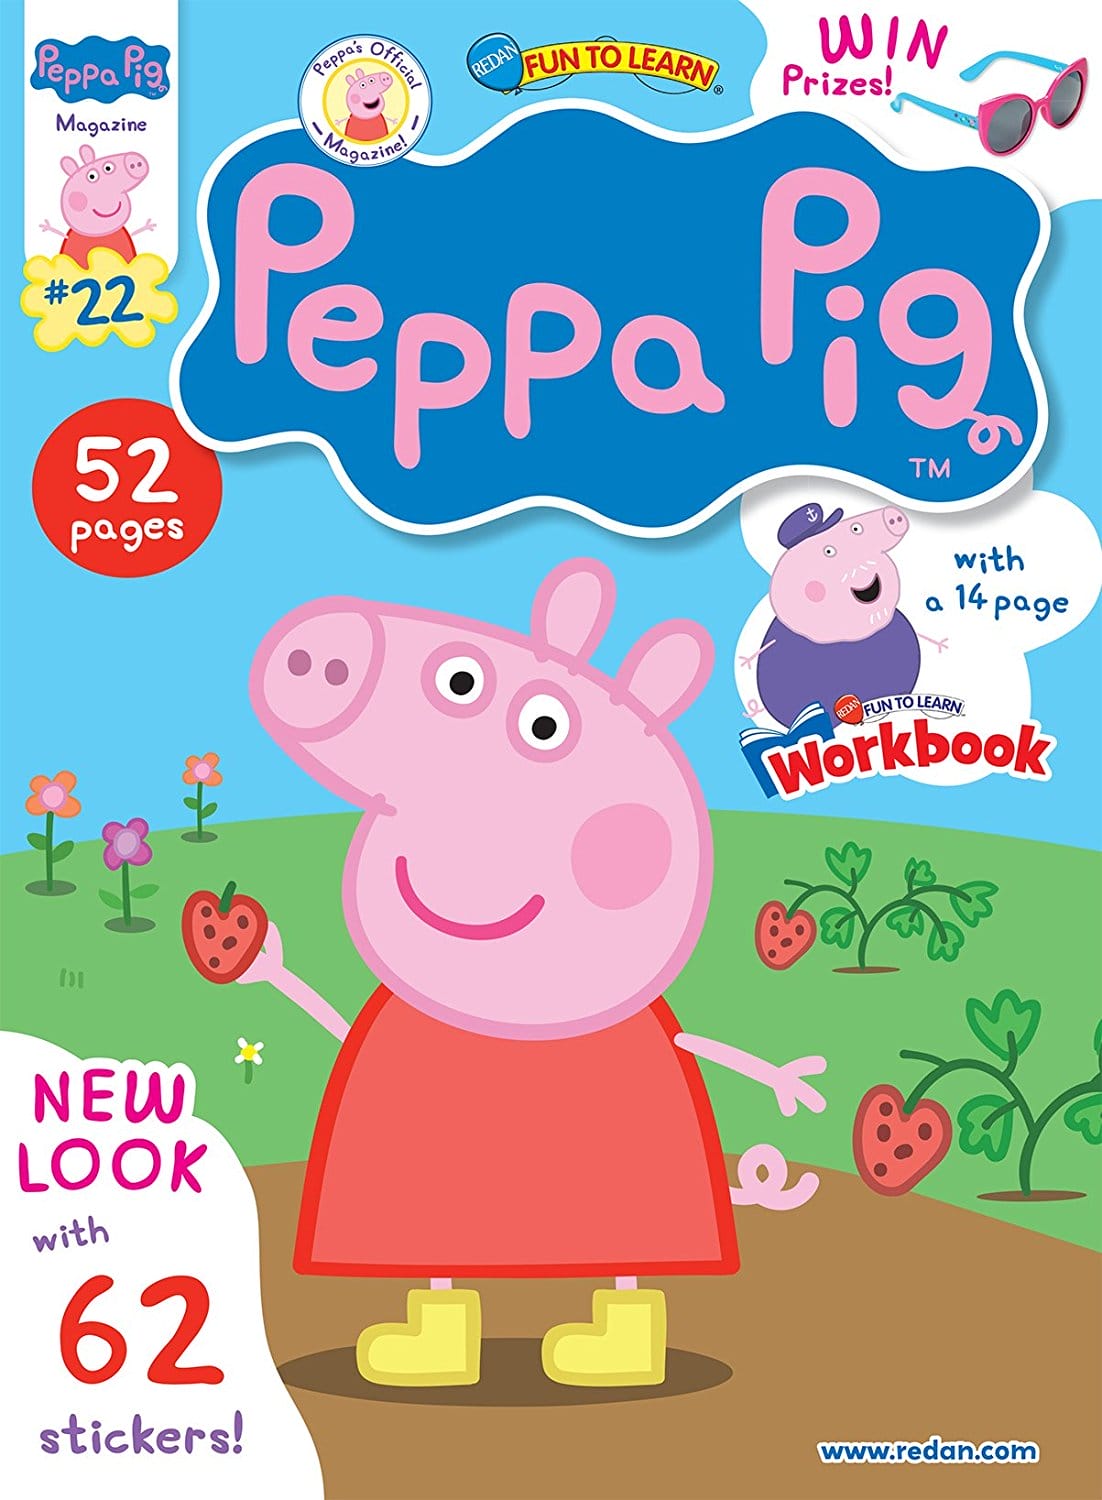 Discount for Peppa Pig Magazine